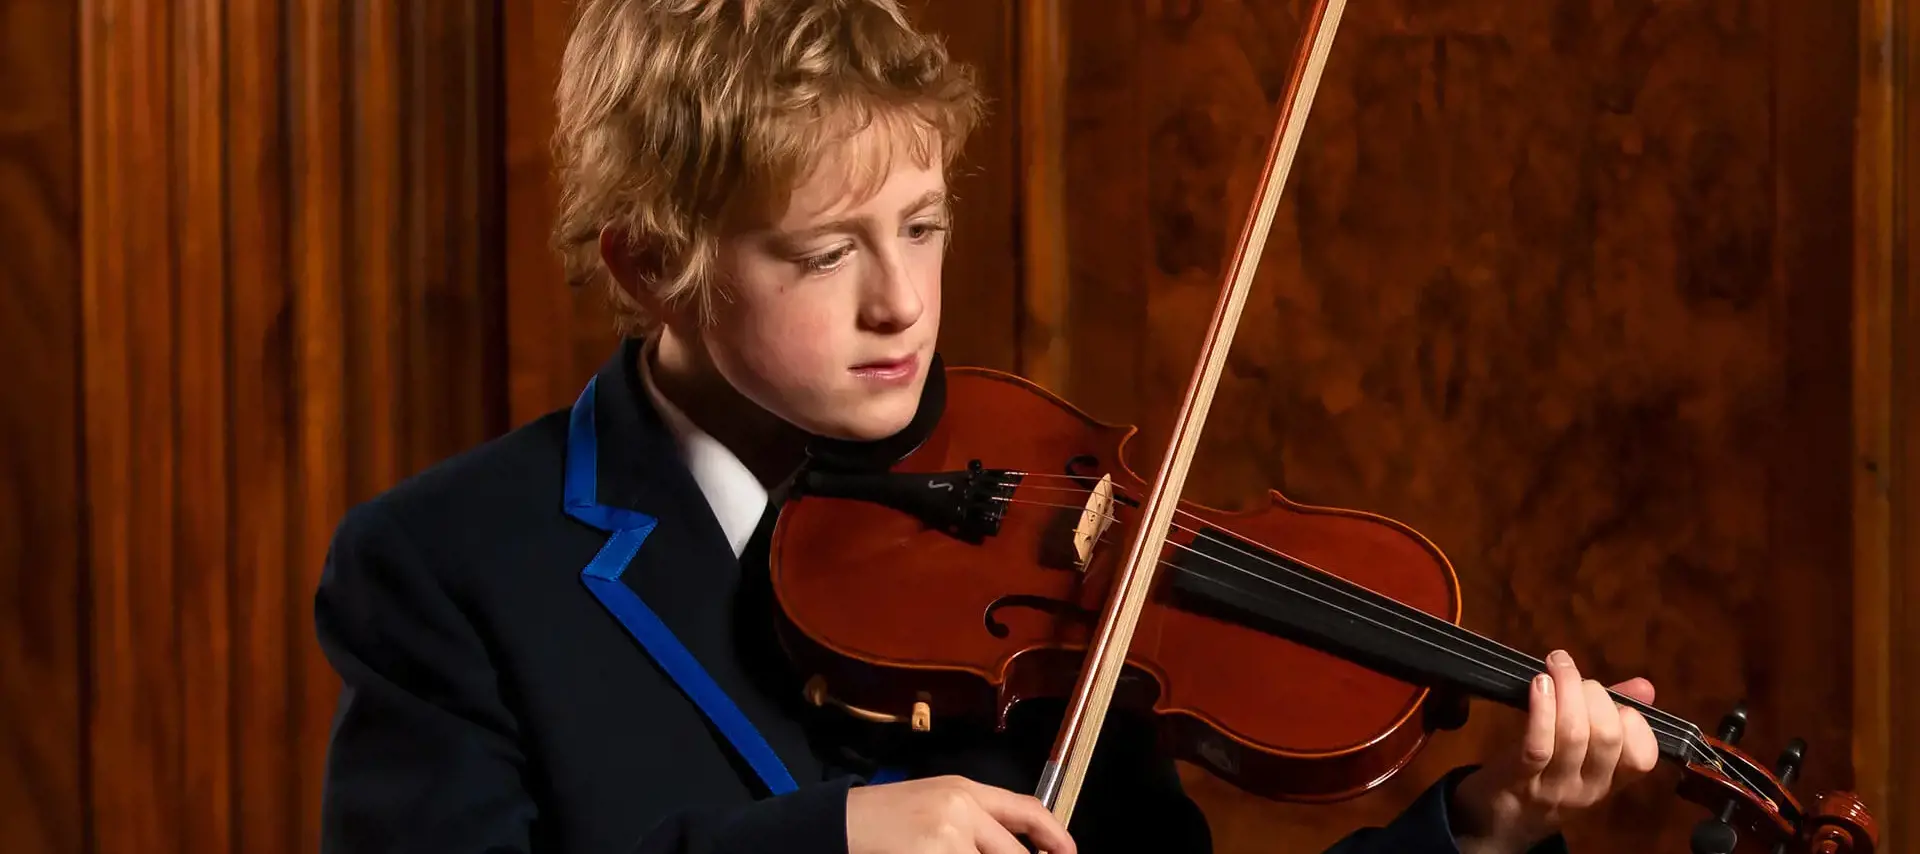 A pupil at The Gregg School playing violin